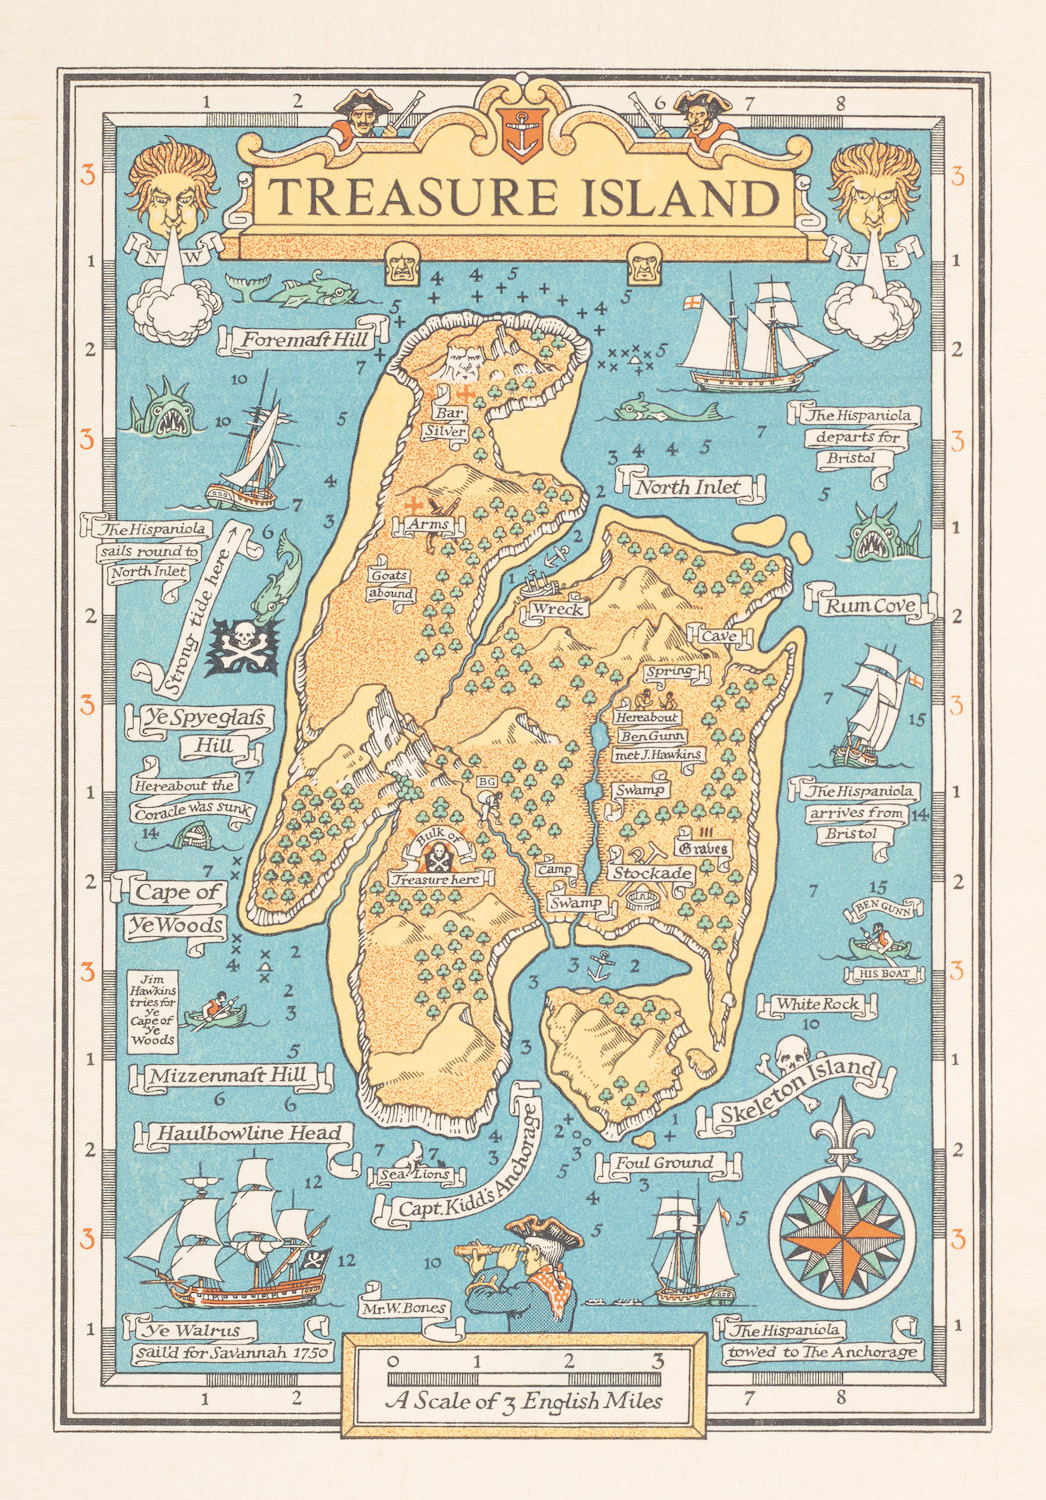 The Fictional Maps That Fill Us With Wonder, Glimpses